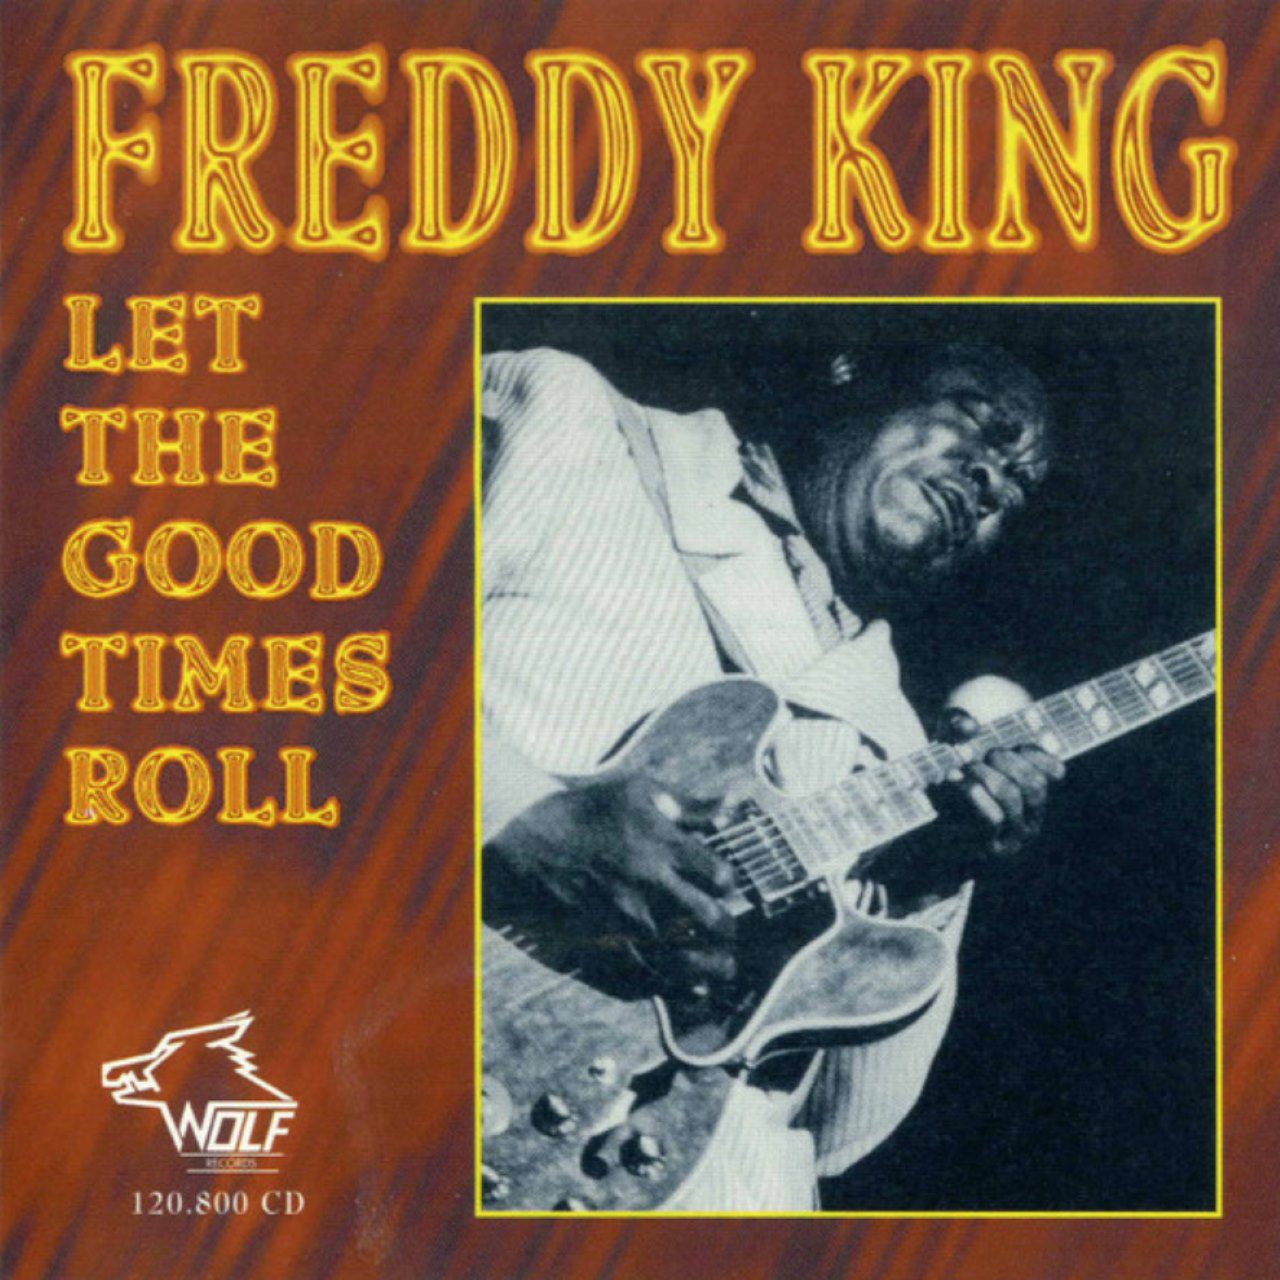 Freddy King – Let The Good Times Roll COVER ALBUM